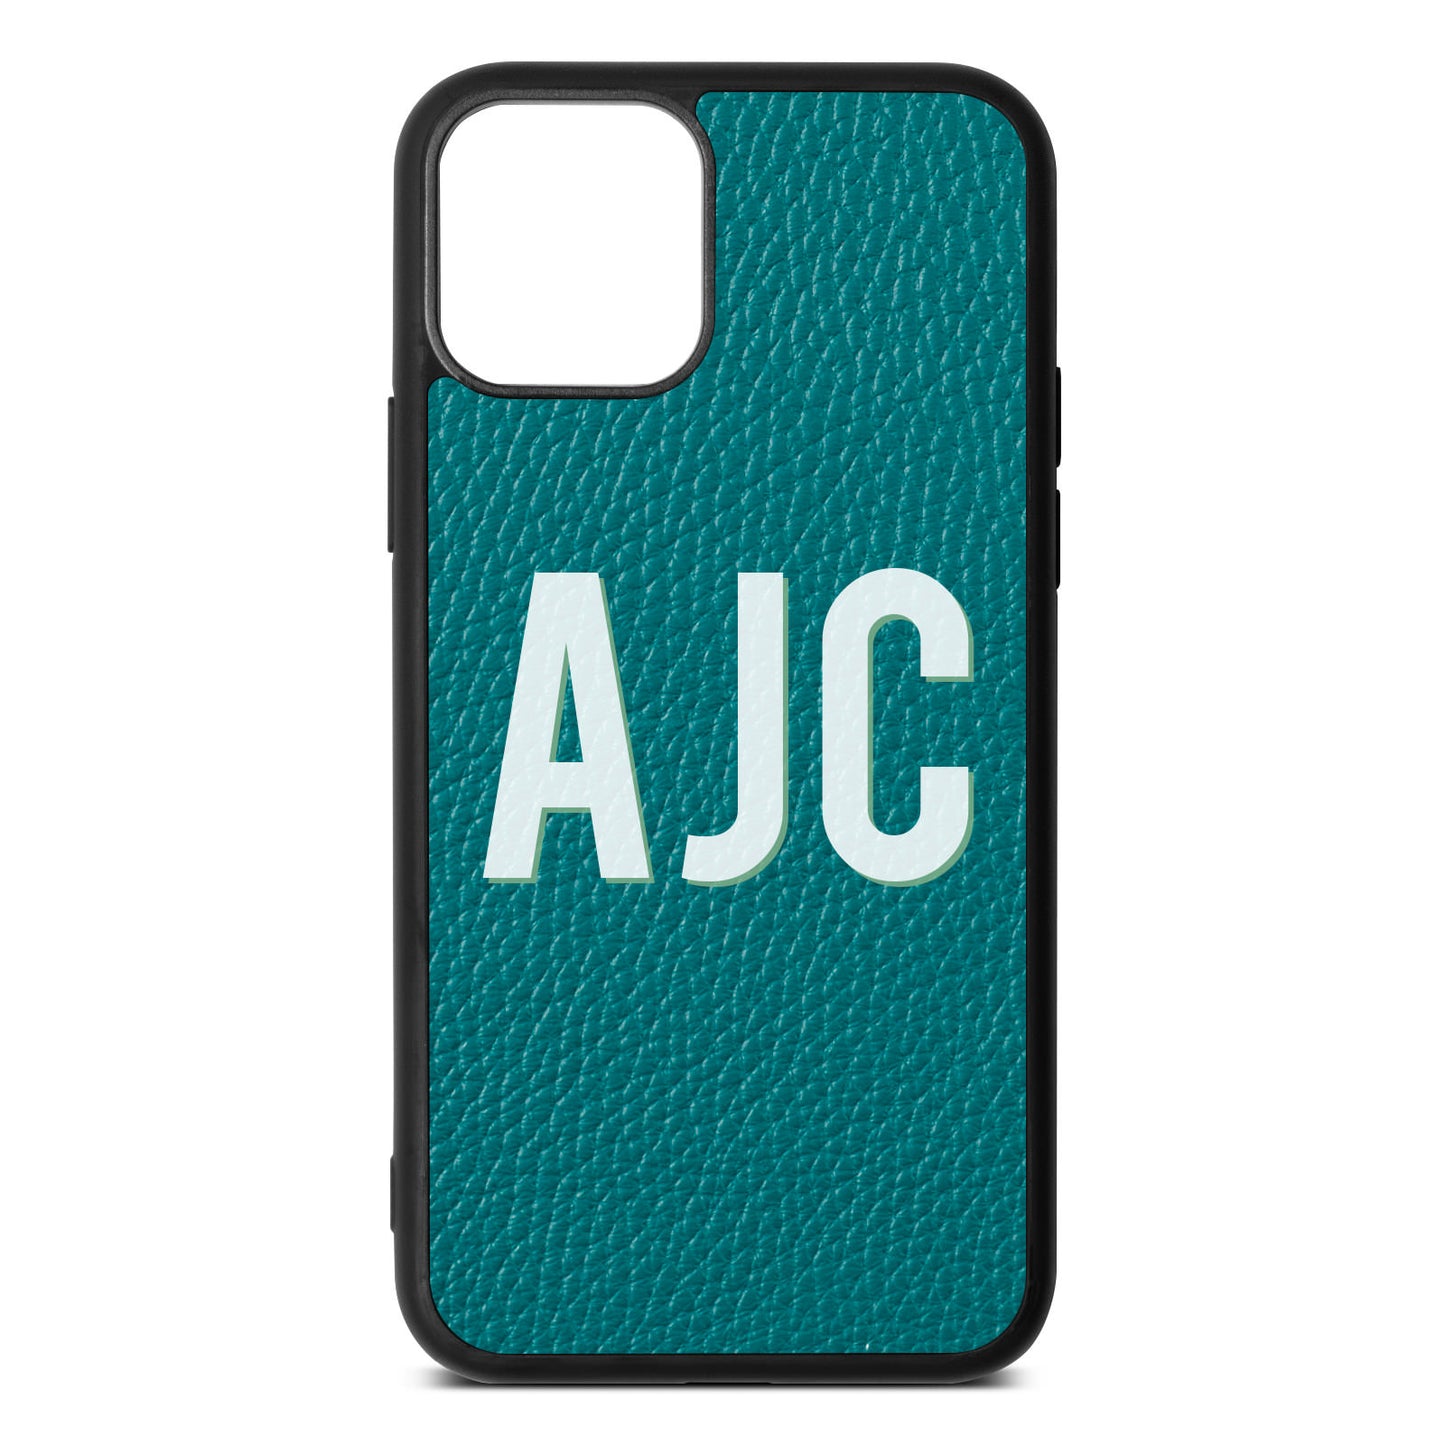 iPhone 11 Pebble Green Leather iPhone Case